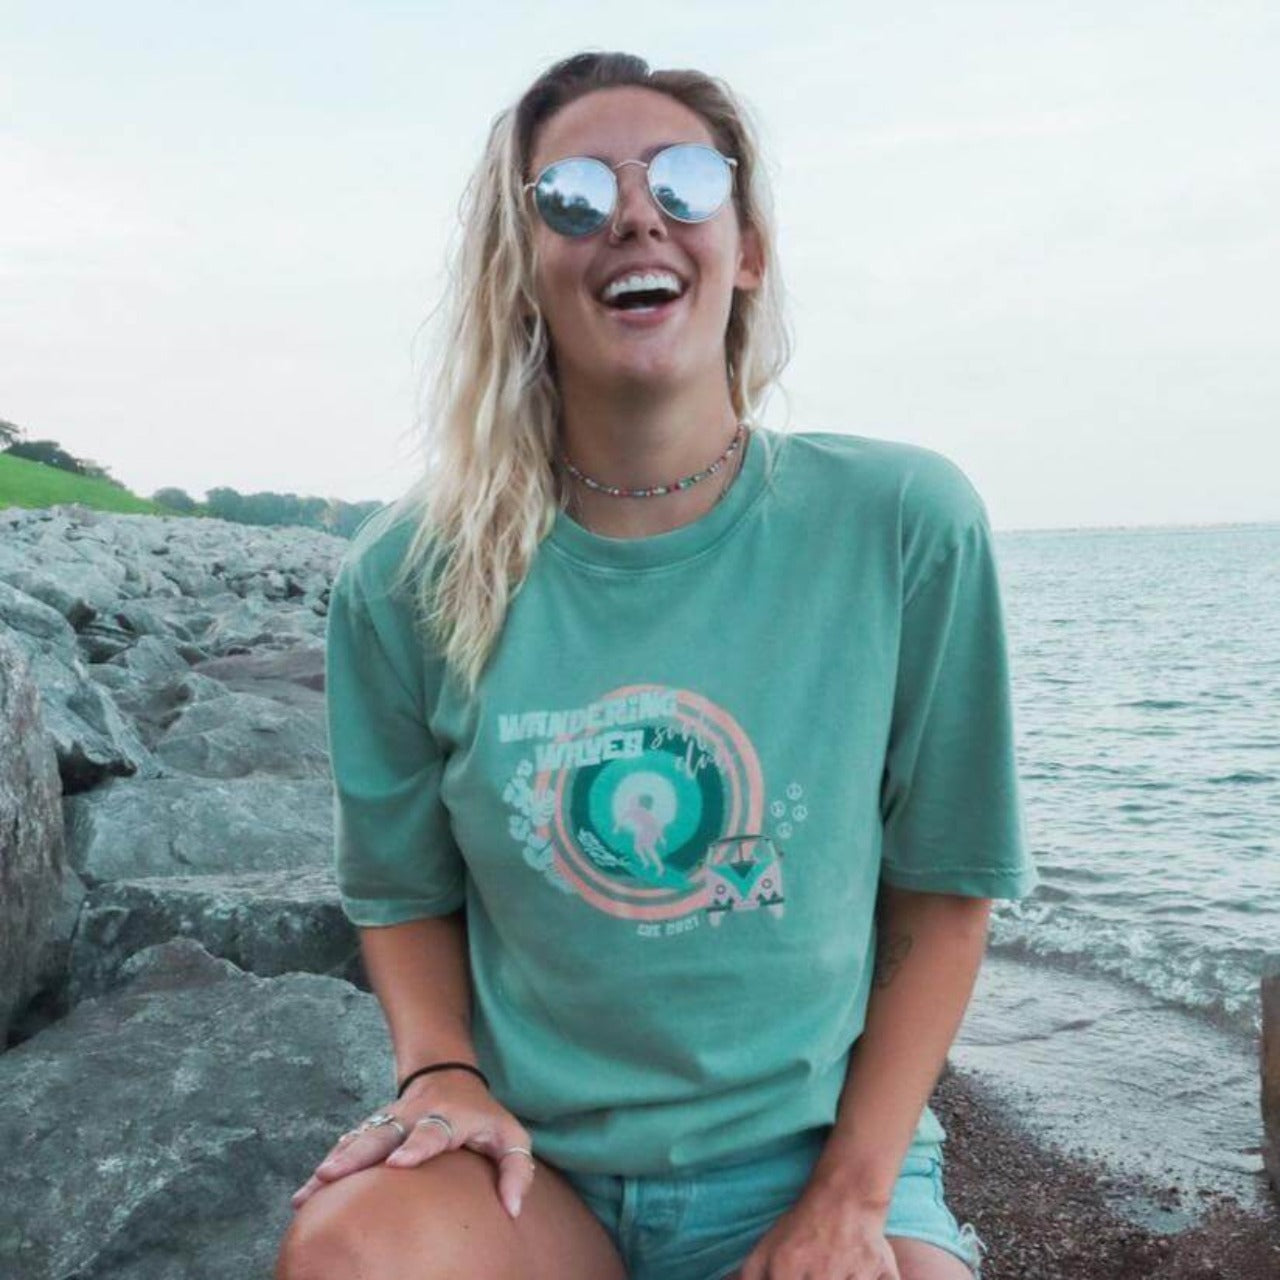 "Surf Club Mantra Tee" by Wandering Waves Surf Company designed by Amanda Vick of Moon and Wolf Co.